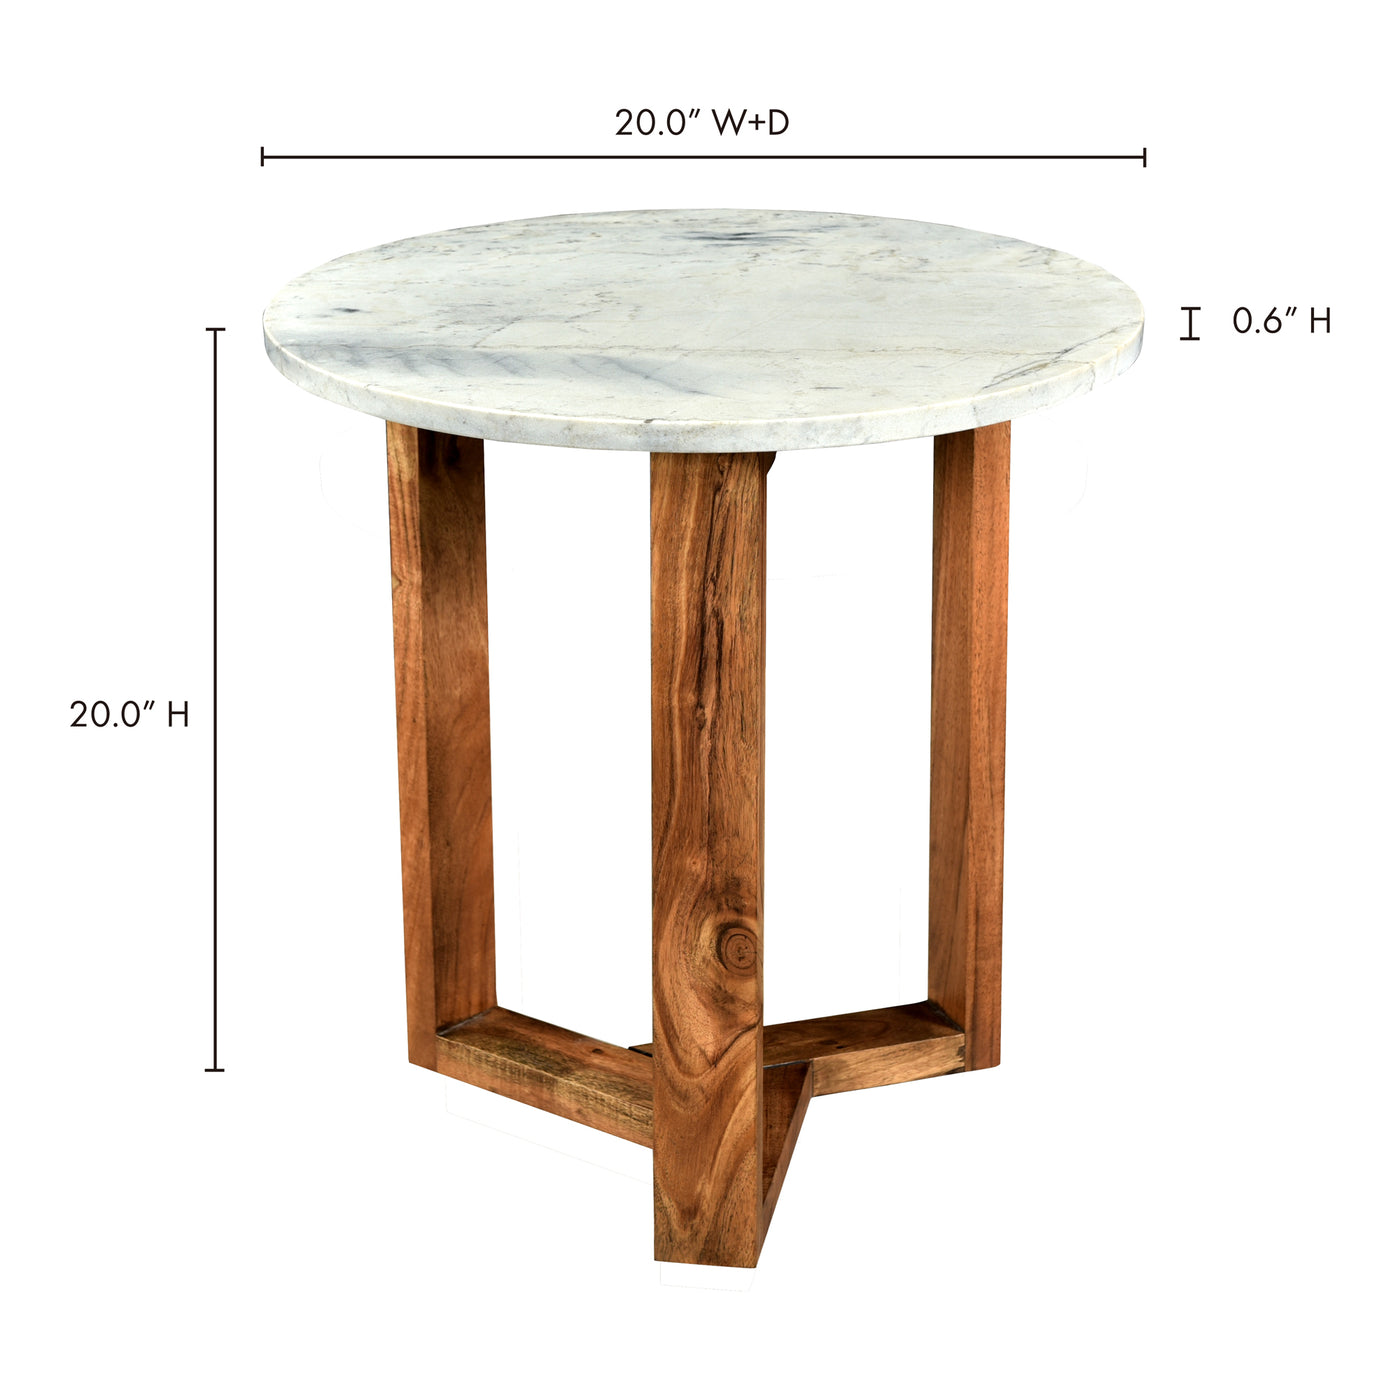 A classic staple that will transcend every dining situation. The Jinxx Side Table evokes modern simplicity with its geomet...